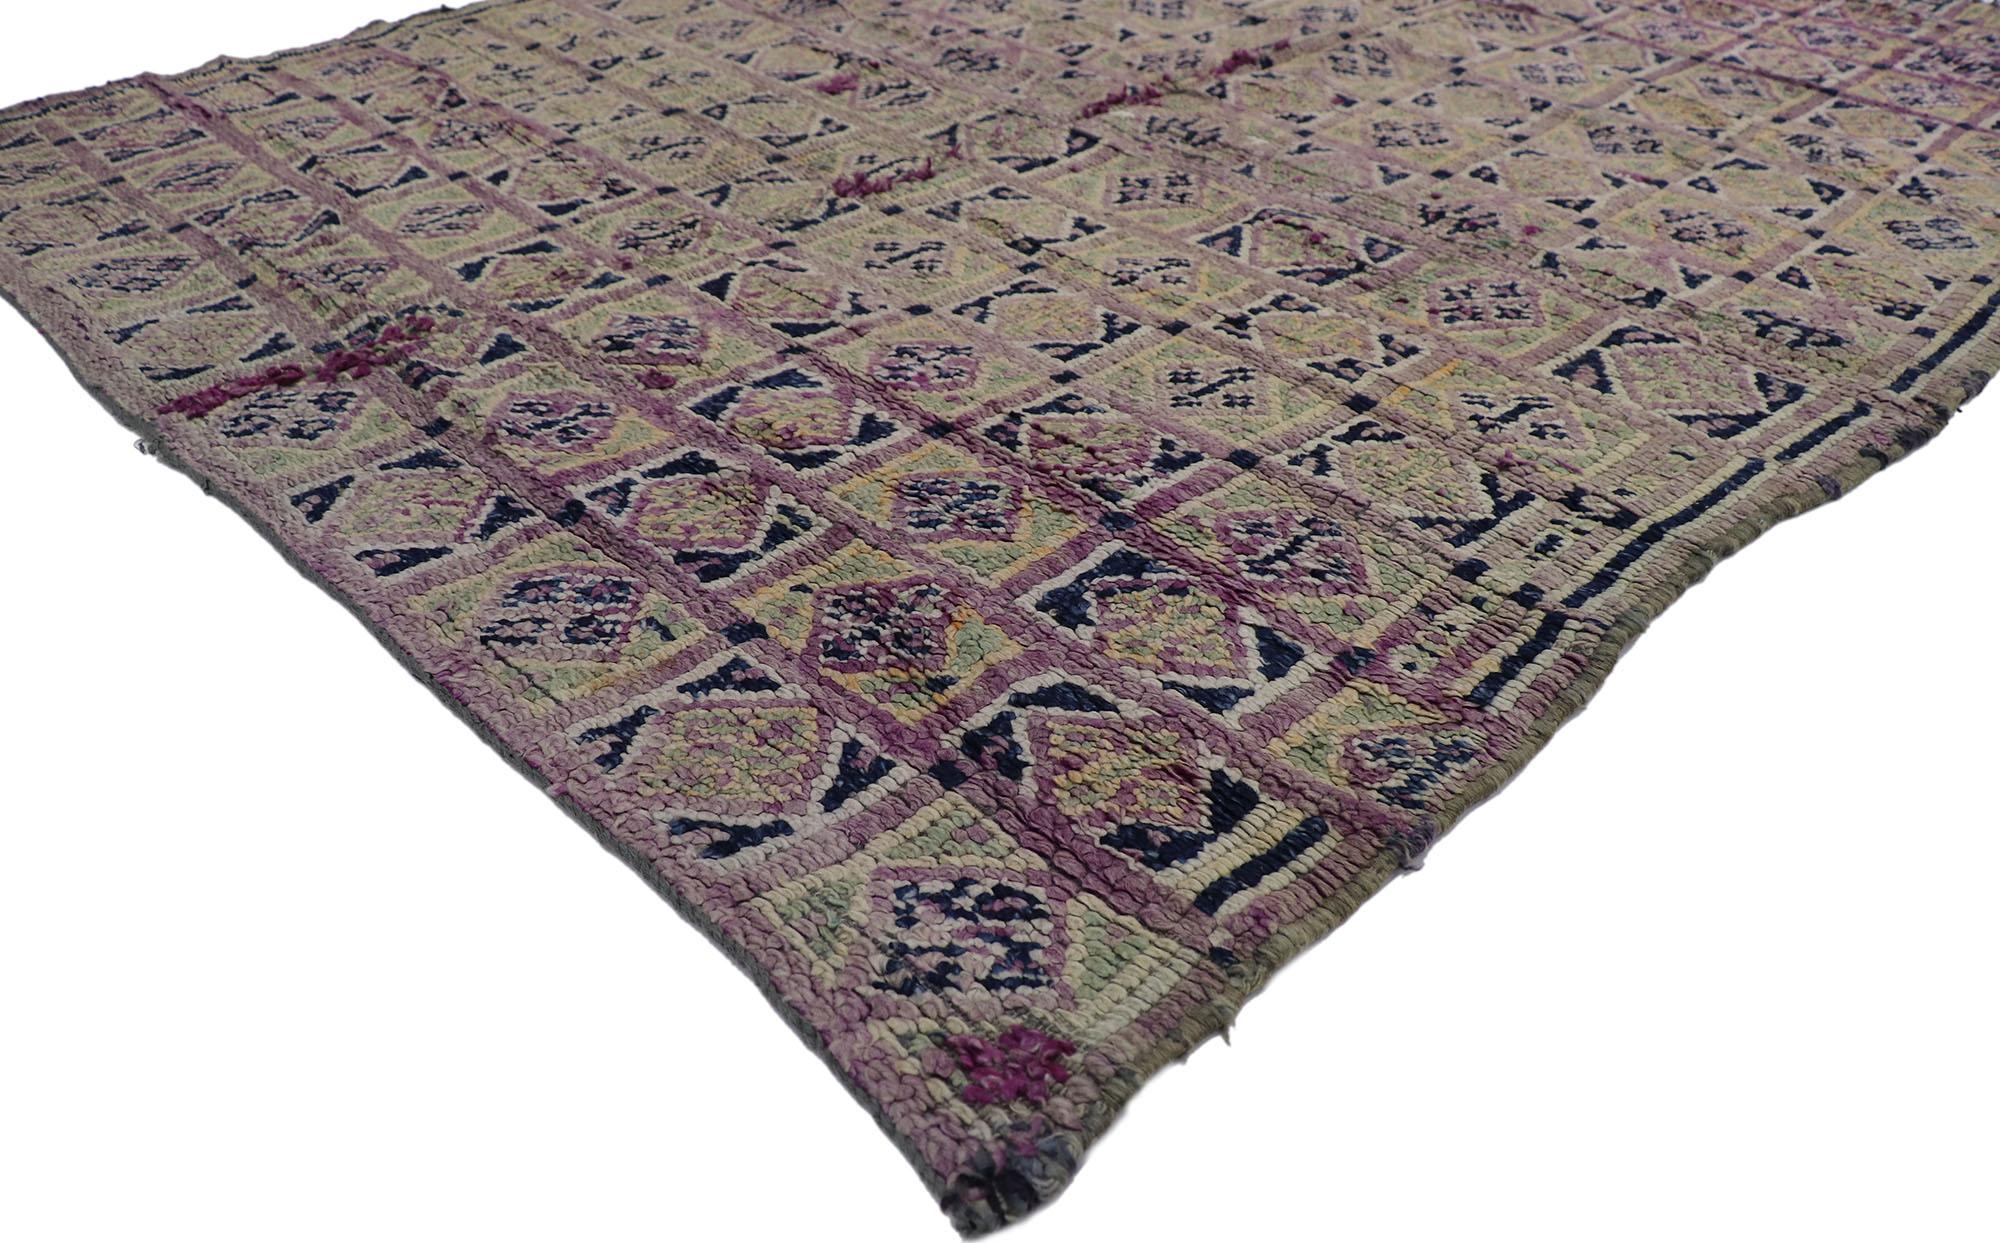 21341 Vintage Berber Purple Moroccan Rug with Boho Chic Tribal Style 05'08 x 07'01. Showcasing a bold expressive design, incredible detail and texture, this hand knotted wool vintage Berber Moroccan rug is a captivating vision of woven beauty. The